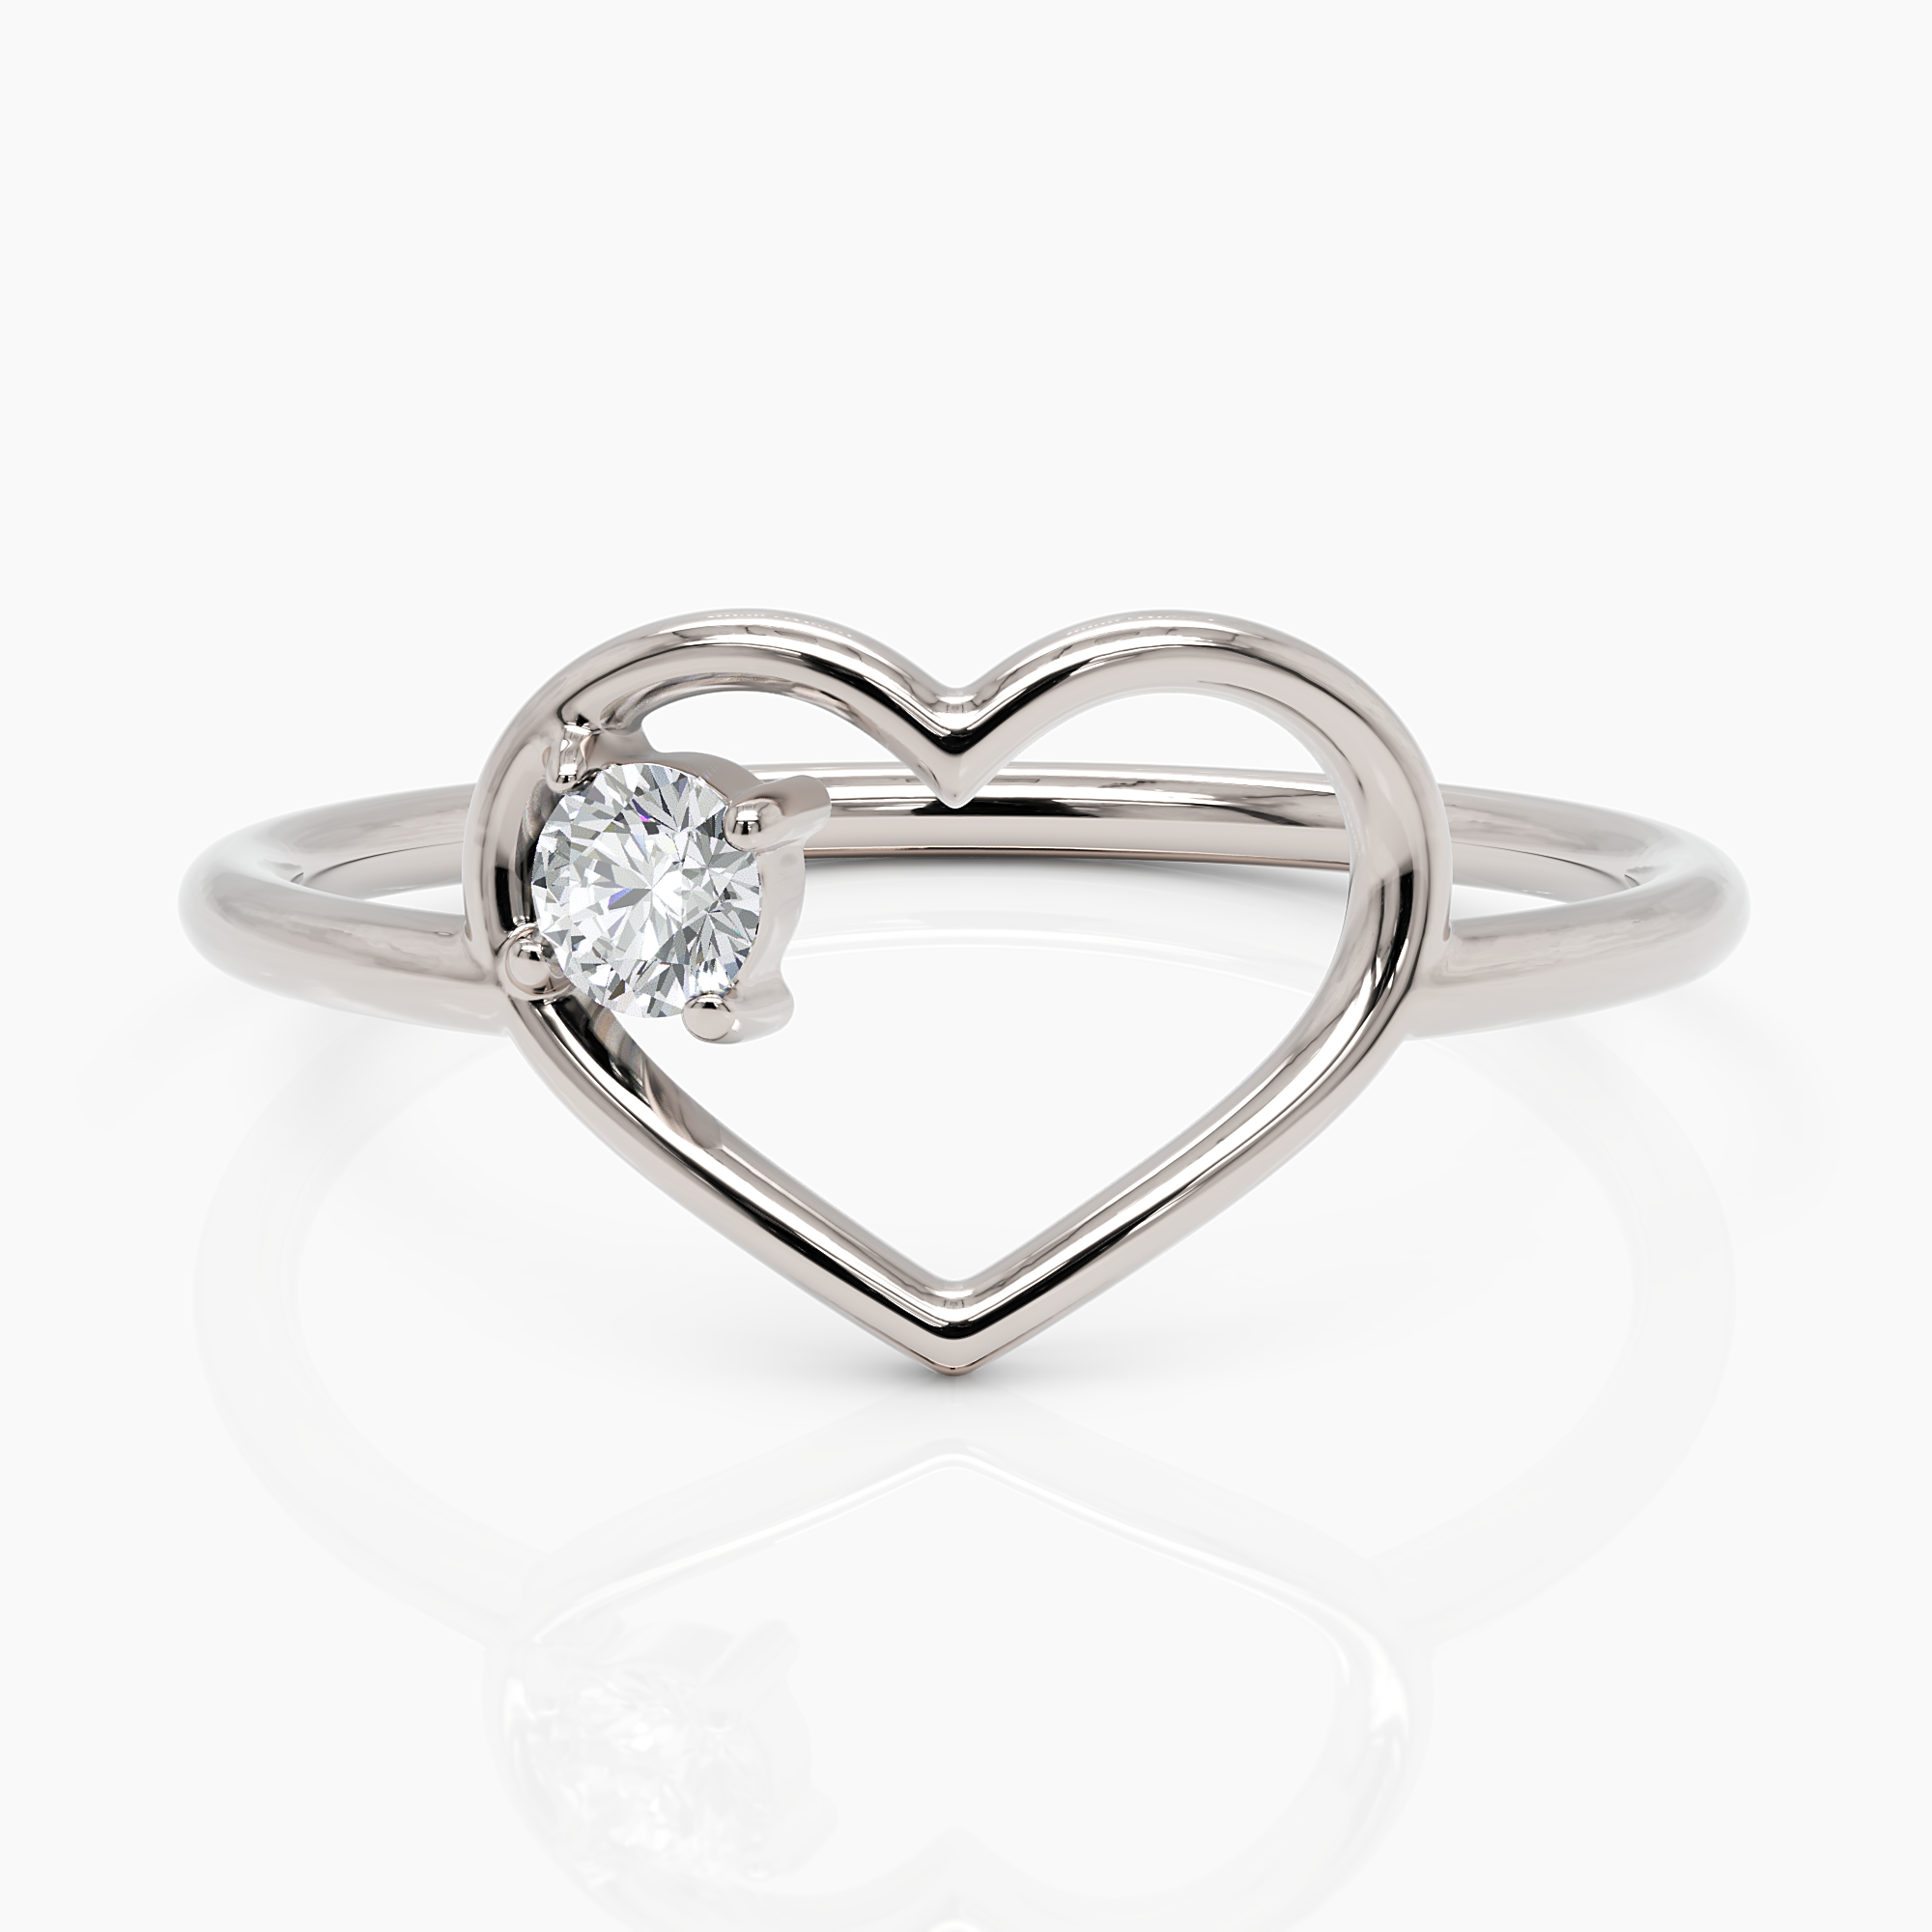 Heart Shaped Ring with Diamond